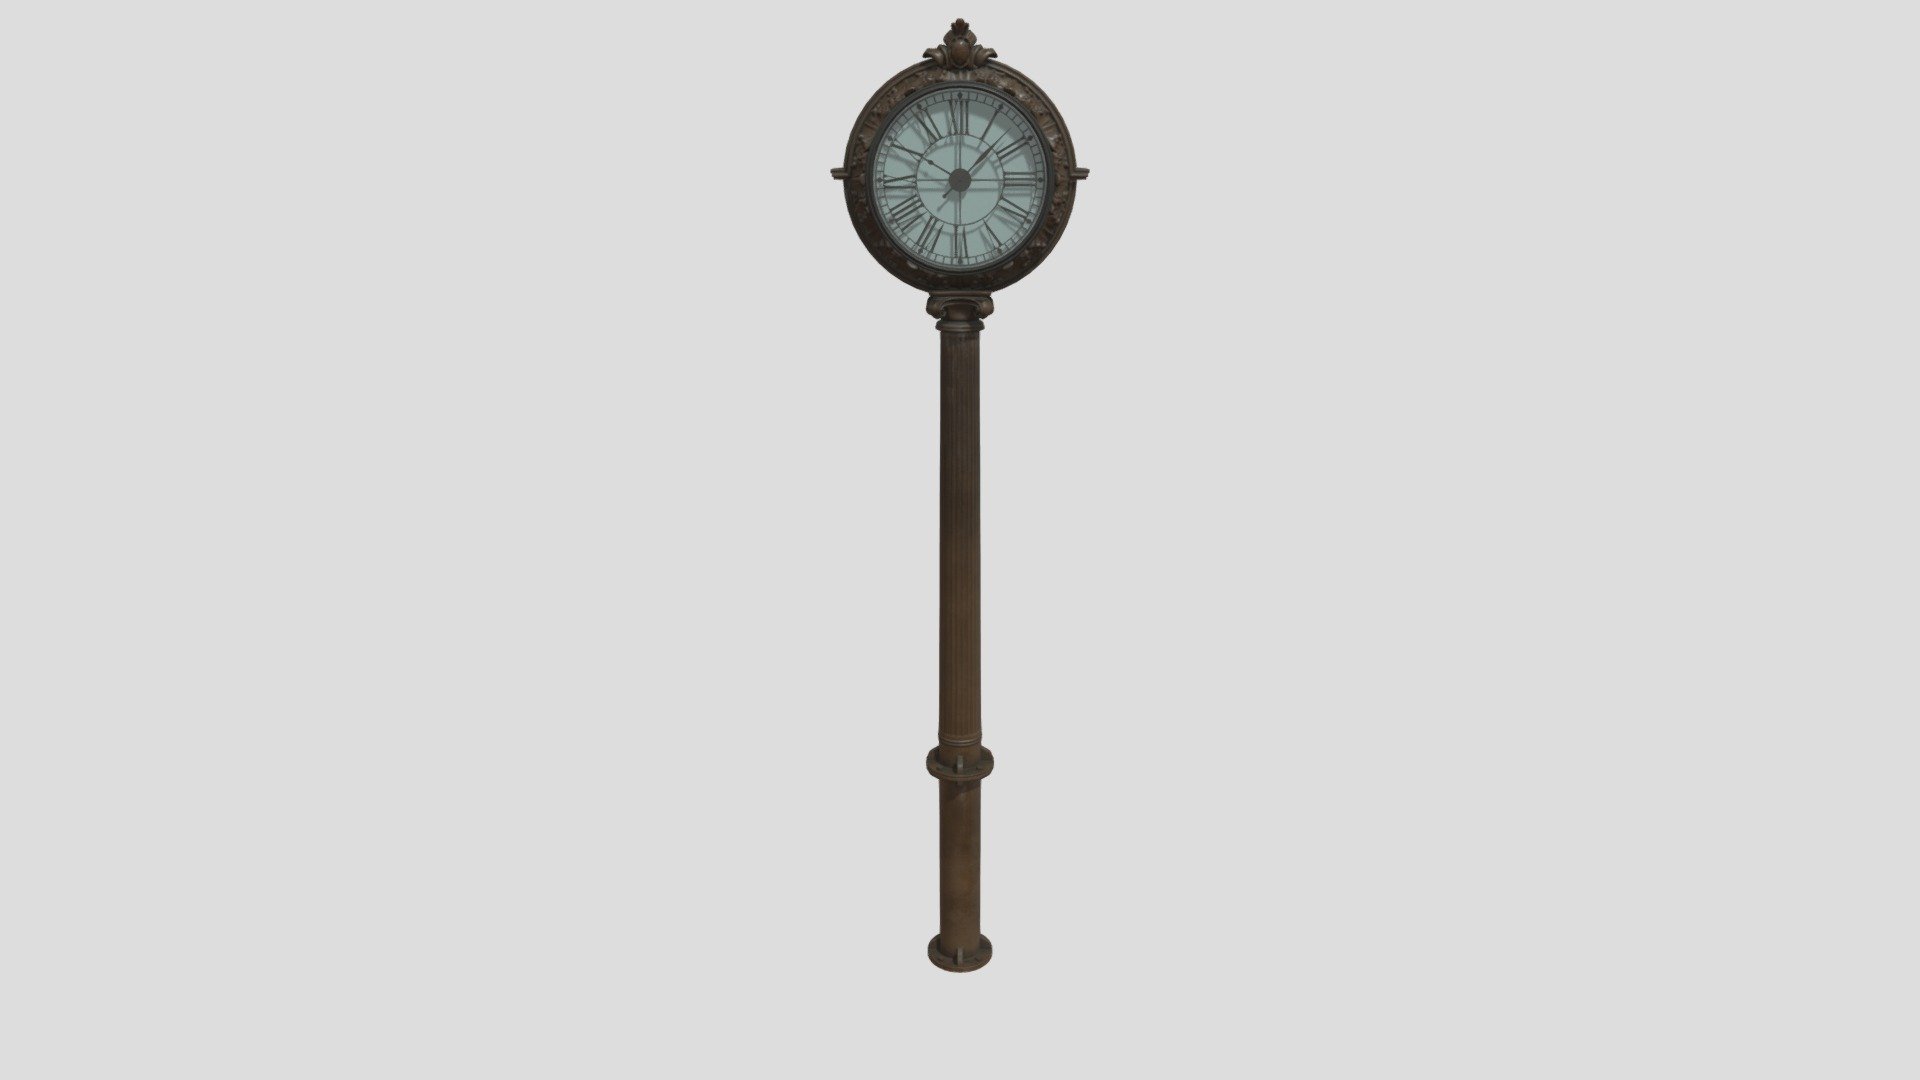 Professional, high quality 3d model of street clock ready to use in your visualizations with textures and materials included 3d model